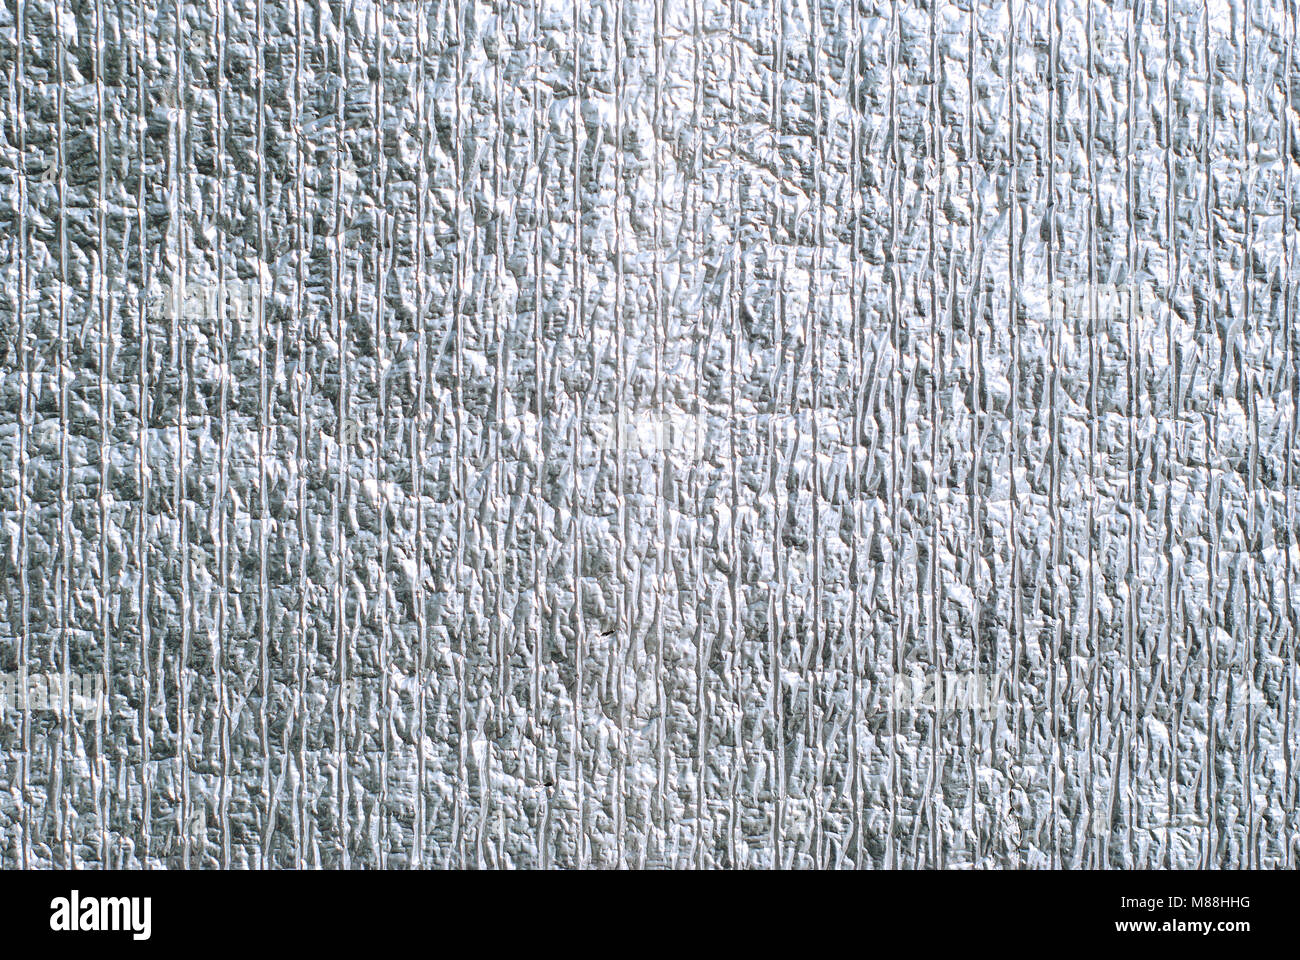 background, texture - silvery wrinkled surface of thermal insulating foil Stock Photo